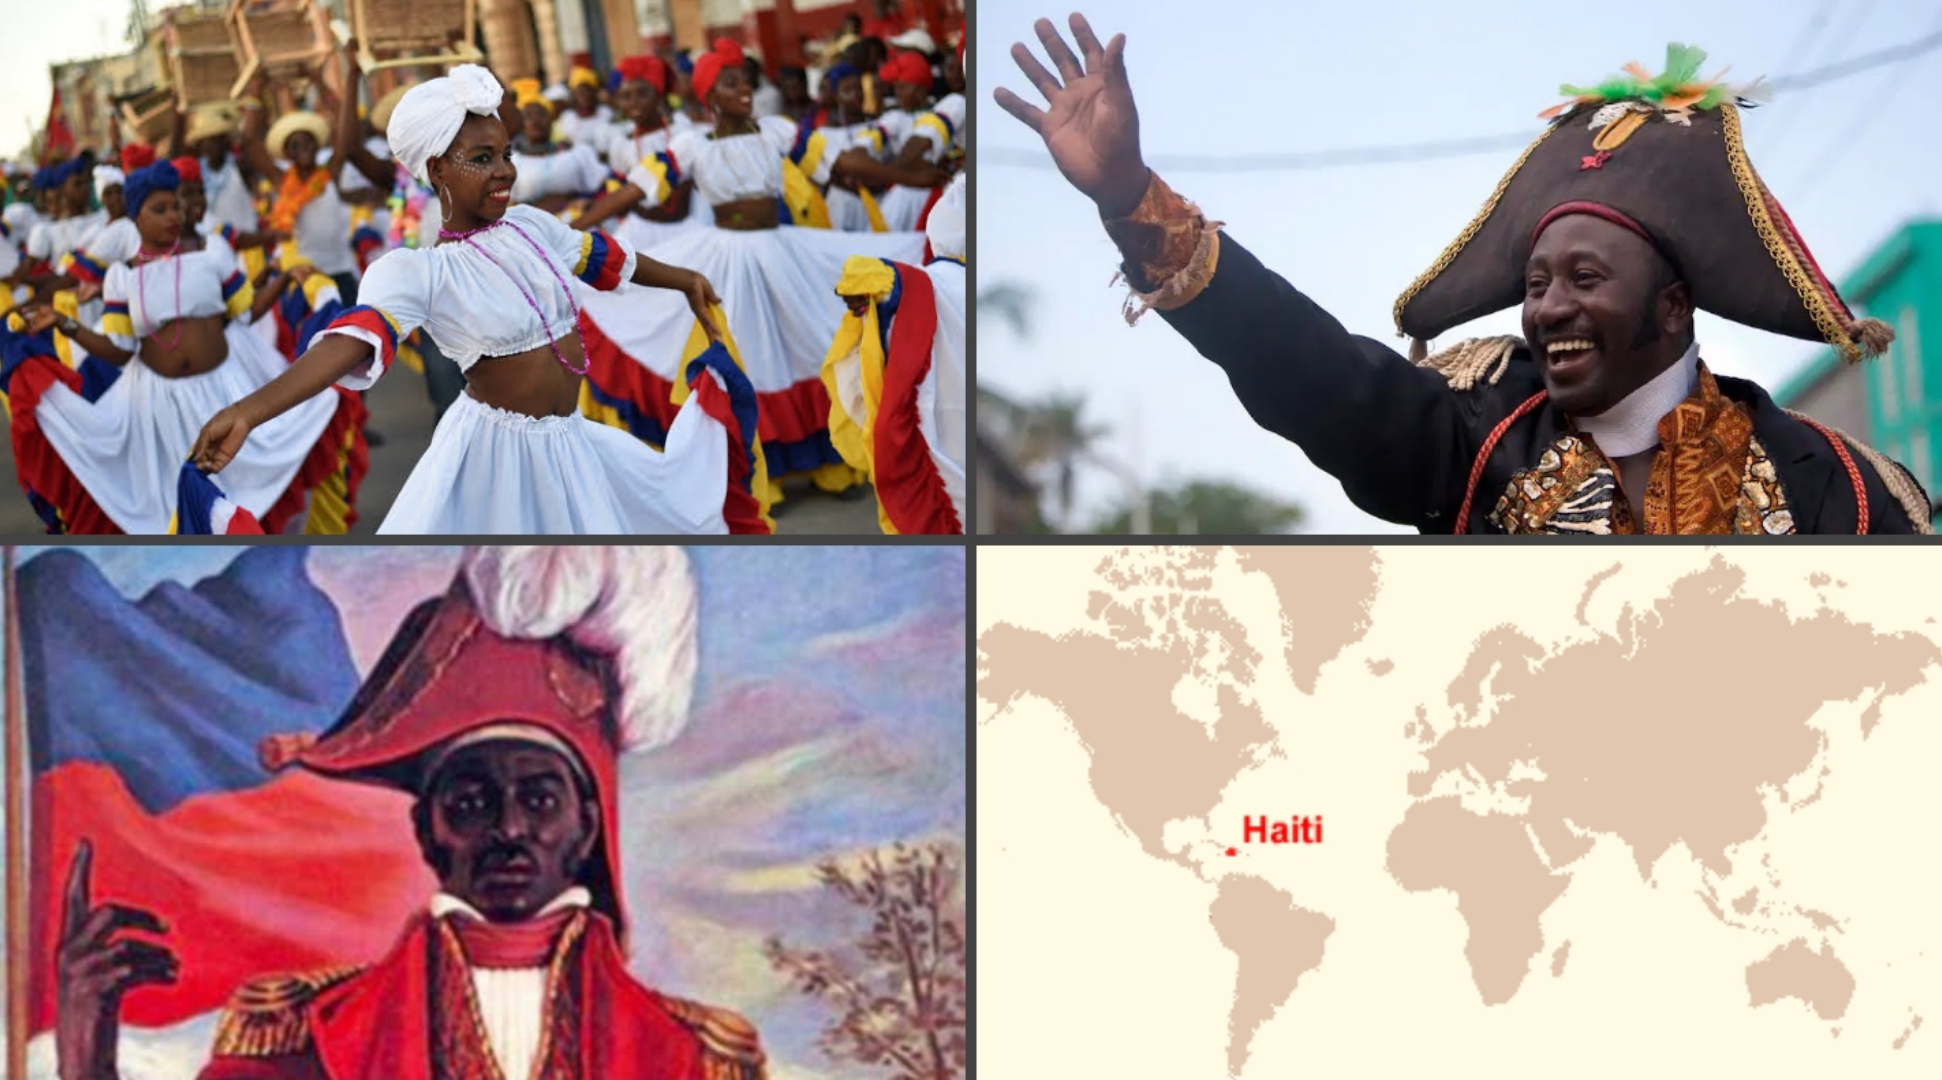 African history:- Haiti: the world’s first black-led republic and only nation established by slave revolt in history AdvertAfrica News on afronewswire.com: Amplifying Africa's Voice | afronewswire.com | Breaking News & Stories